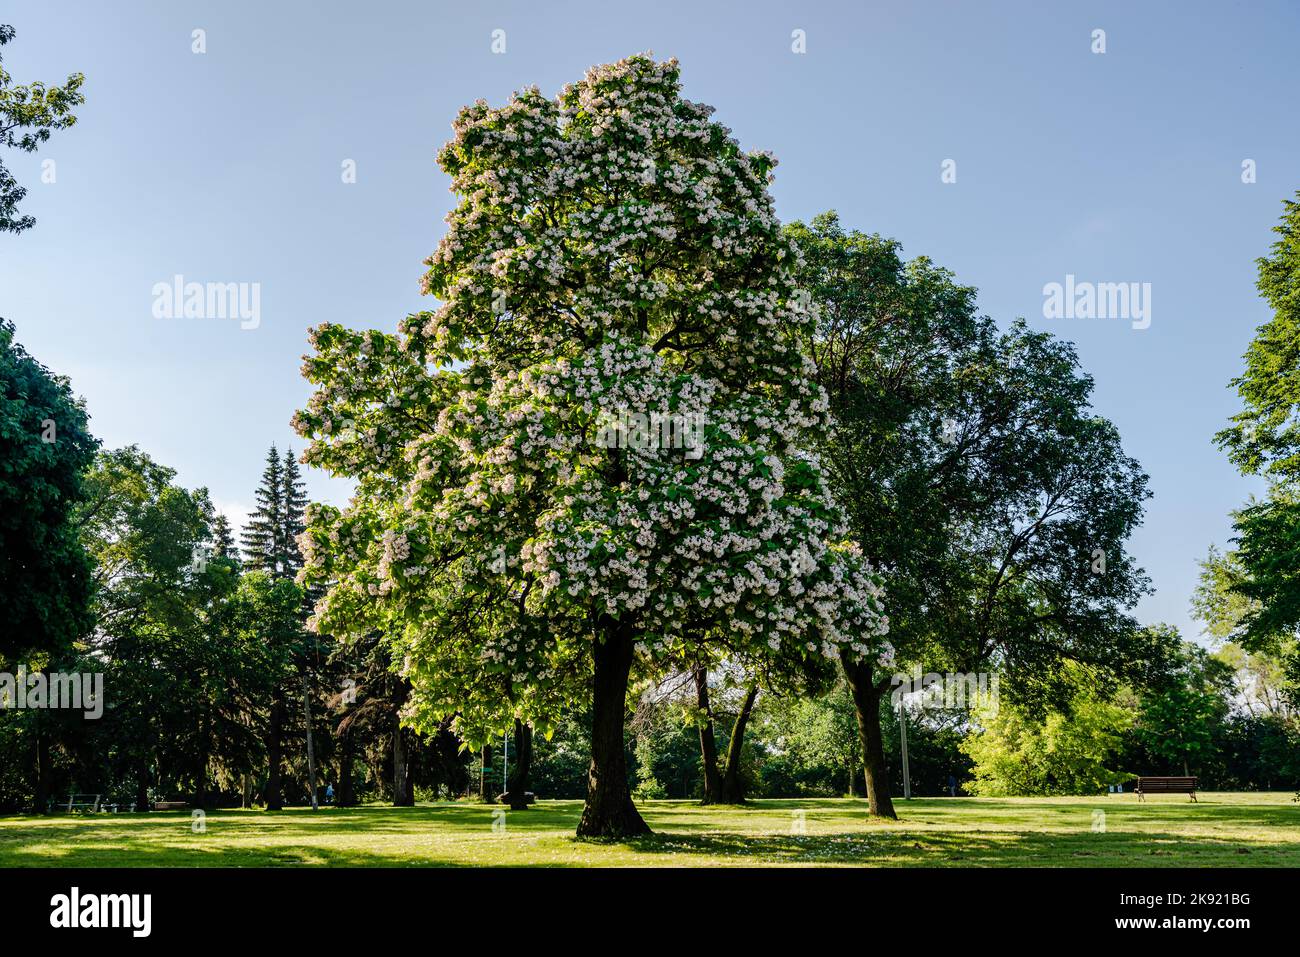 Flowering Northern catalpa in the city park Stock Photo